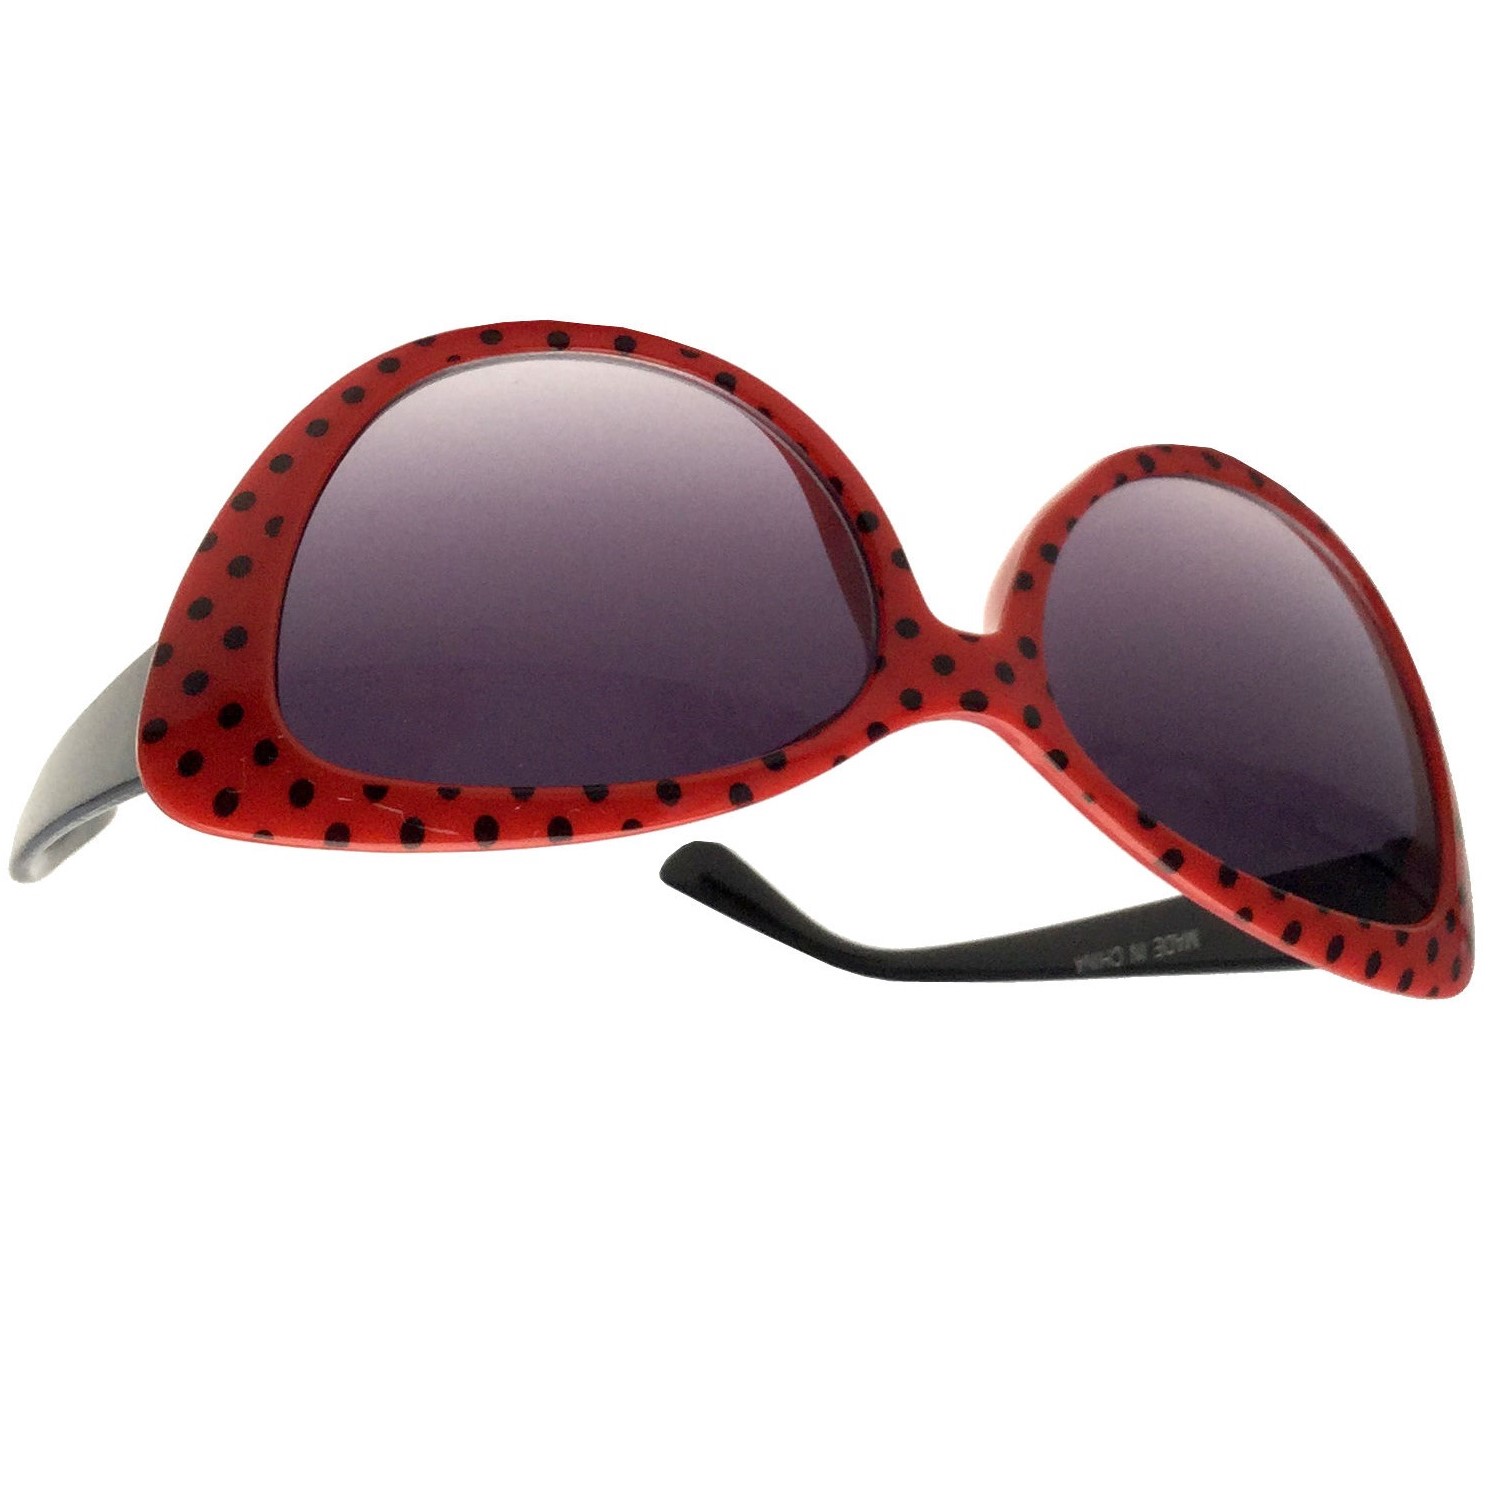 grinderPUNCH GIRLS Kids Fashion Sunglasses Cat Eye Polka Dot 50s/60s Retro Vintage Style Age 2-12 Red - image 4 of 5